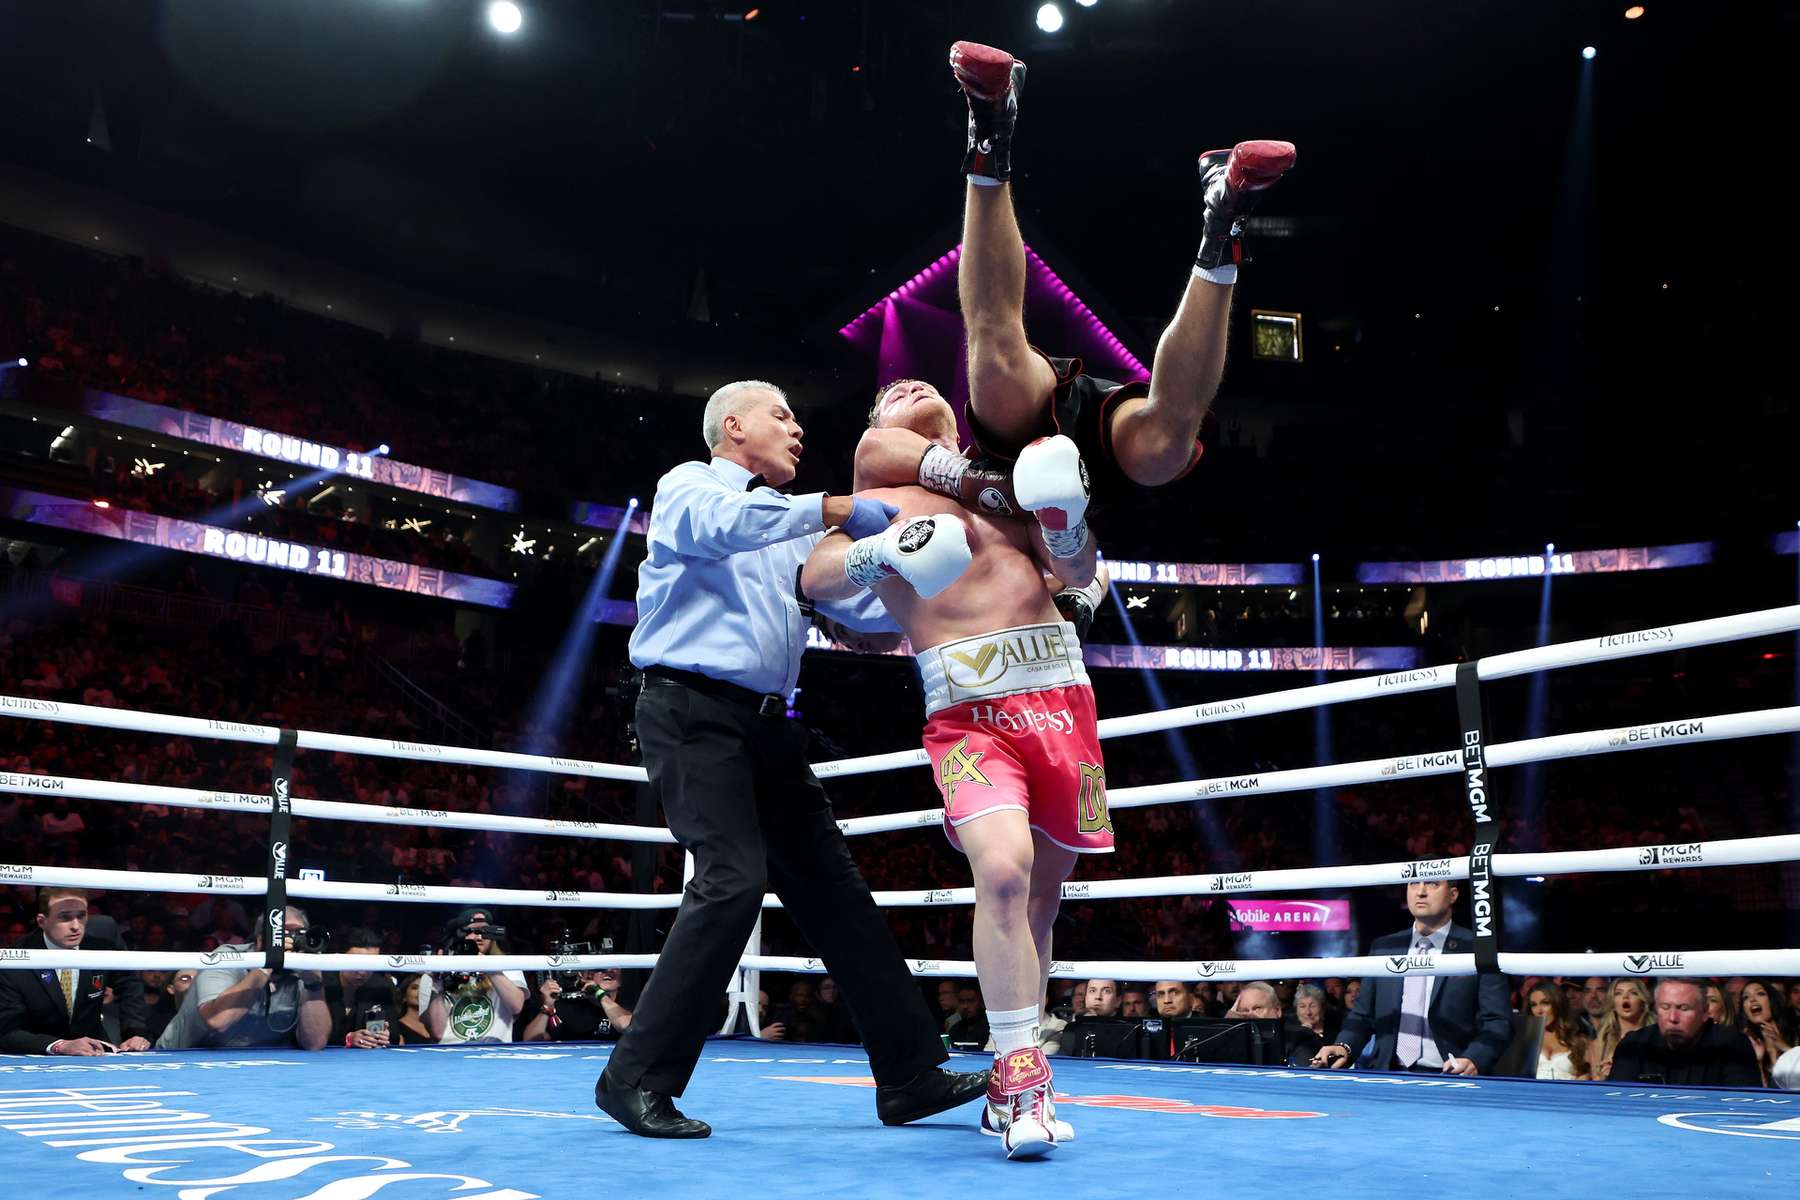 Canelo Alvarez (C) picks up Dmitry Bivol during their WBA light heavyweight title fight at T-Mobile Arena on May 07, 2022 in Las Vegas, Nevada. Bivol retained his title by unanimous decision. 